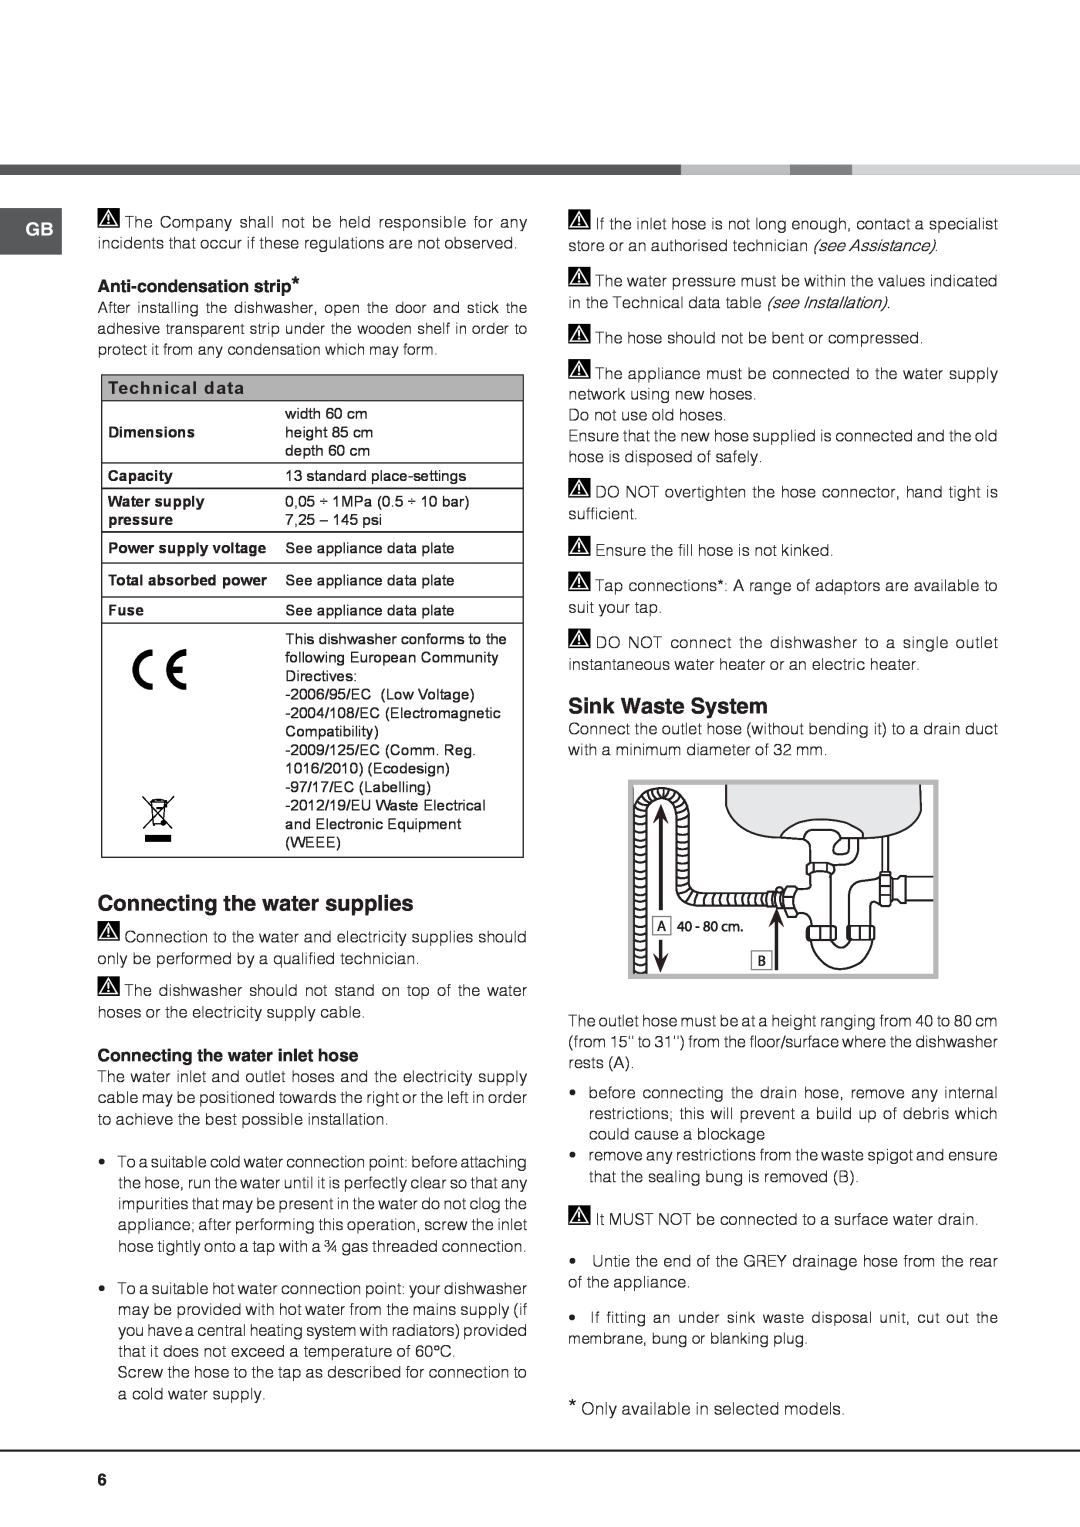 Hotpoint FDYF 11011 manual Connecting the water supplies, Sink Waste System, Anti-condensationstrip, Technical data 